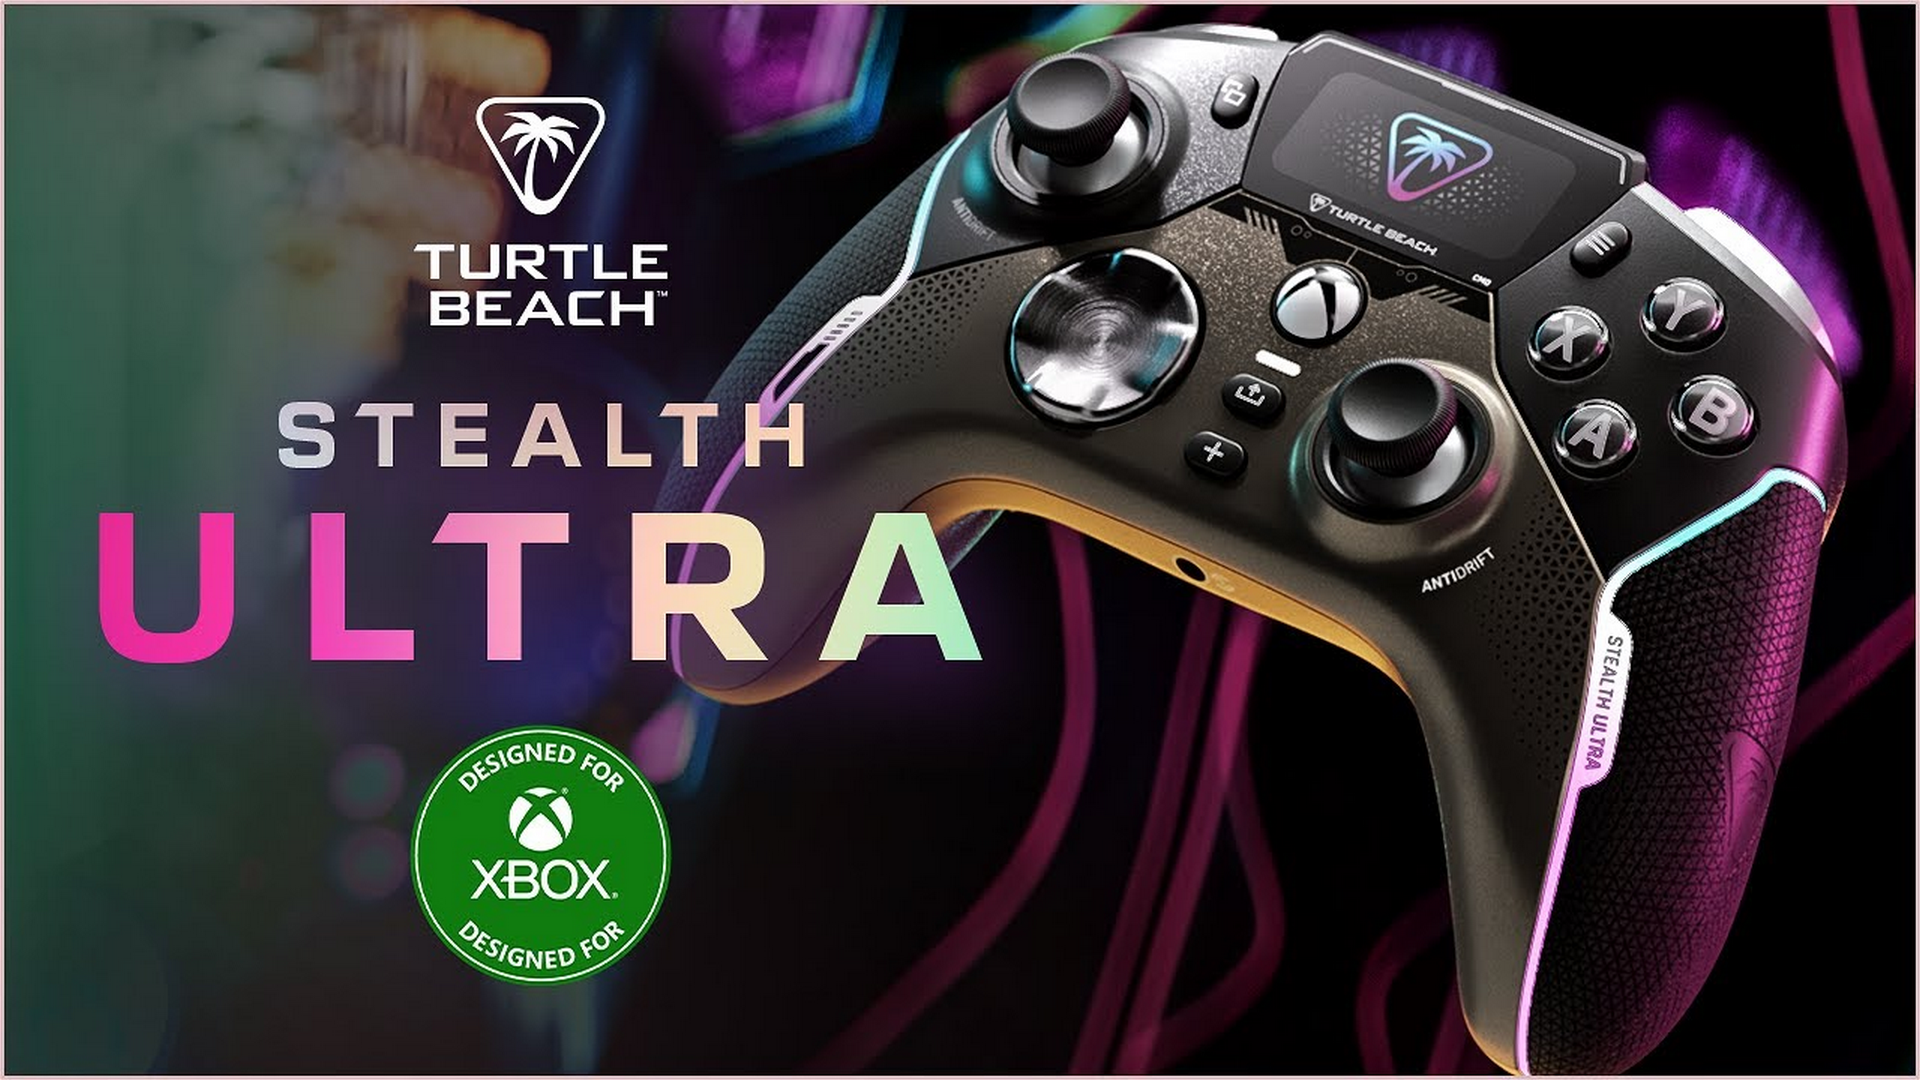 Turtle Beach’s Groundbreaking & Critically Acclaimed Designed For Xbox Stealth Ultra Wireless Controller Launches In Australia